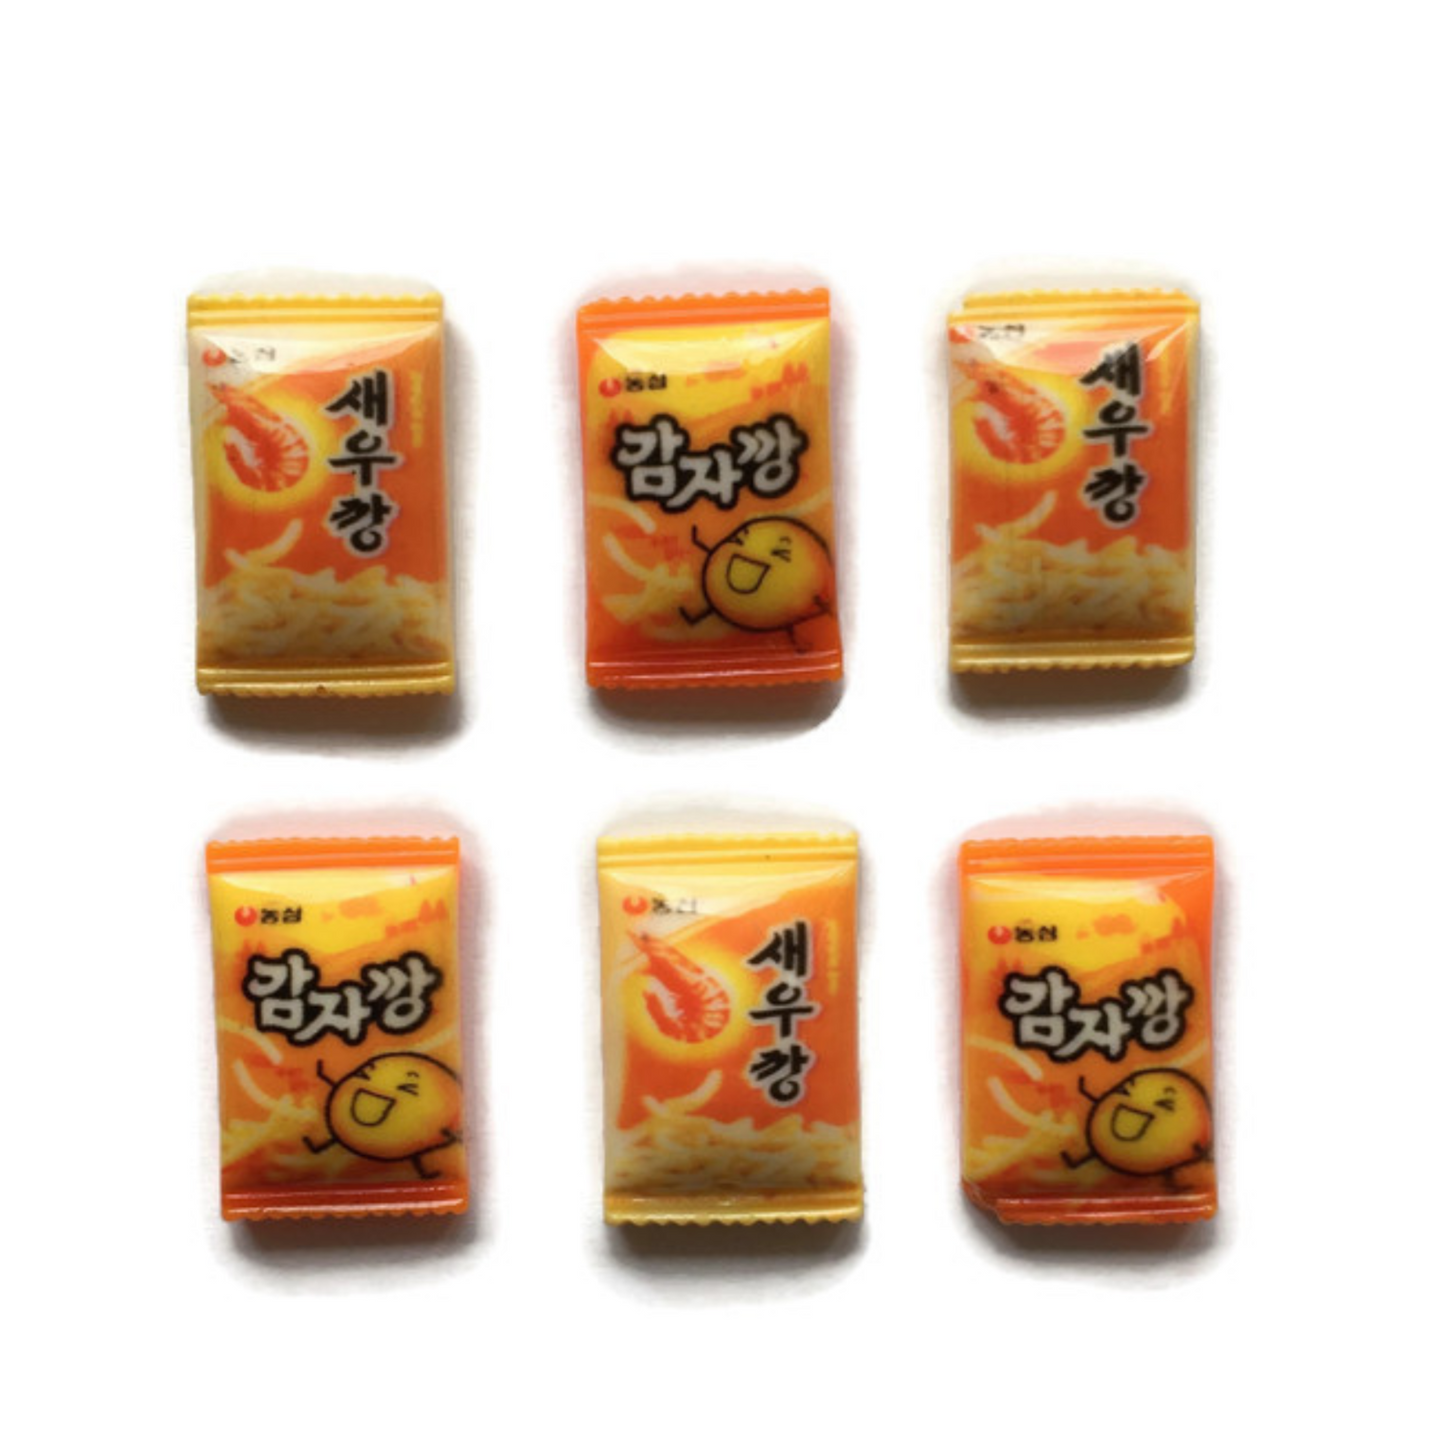 Asian Snack Magnets